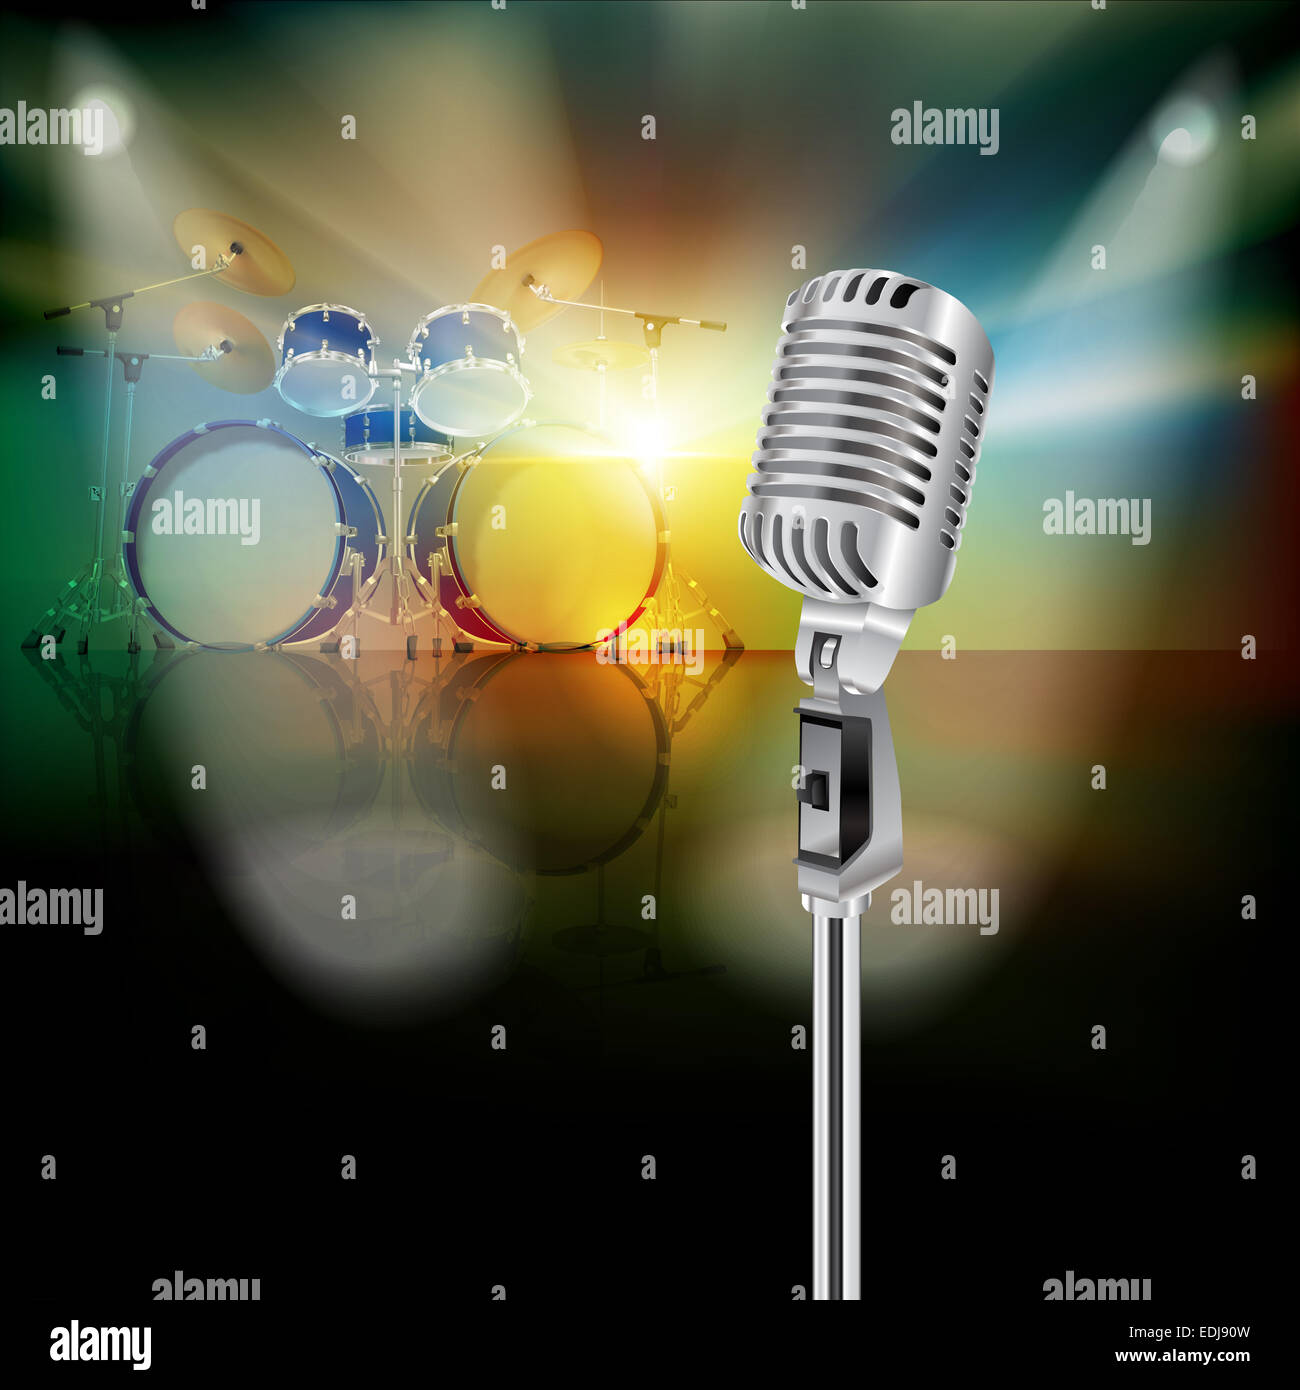 abstract background with drum kit and retro microphone on music stage Stock Photo